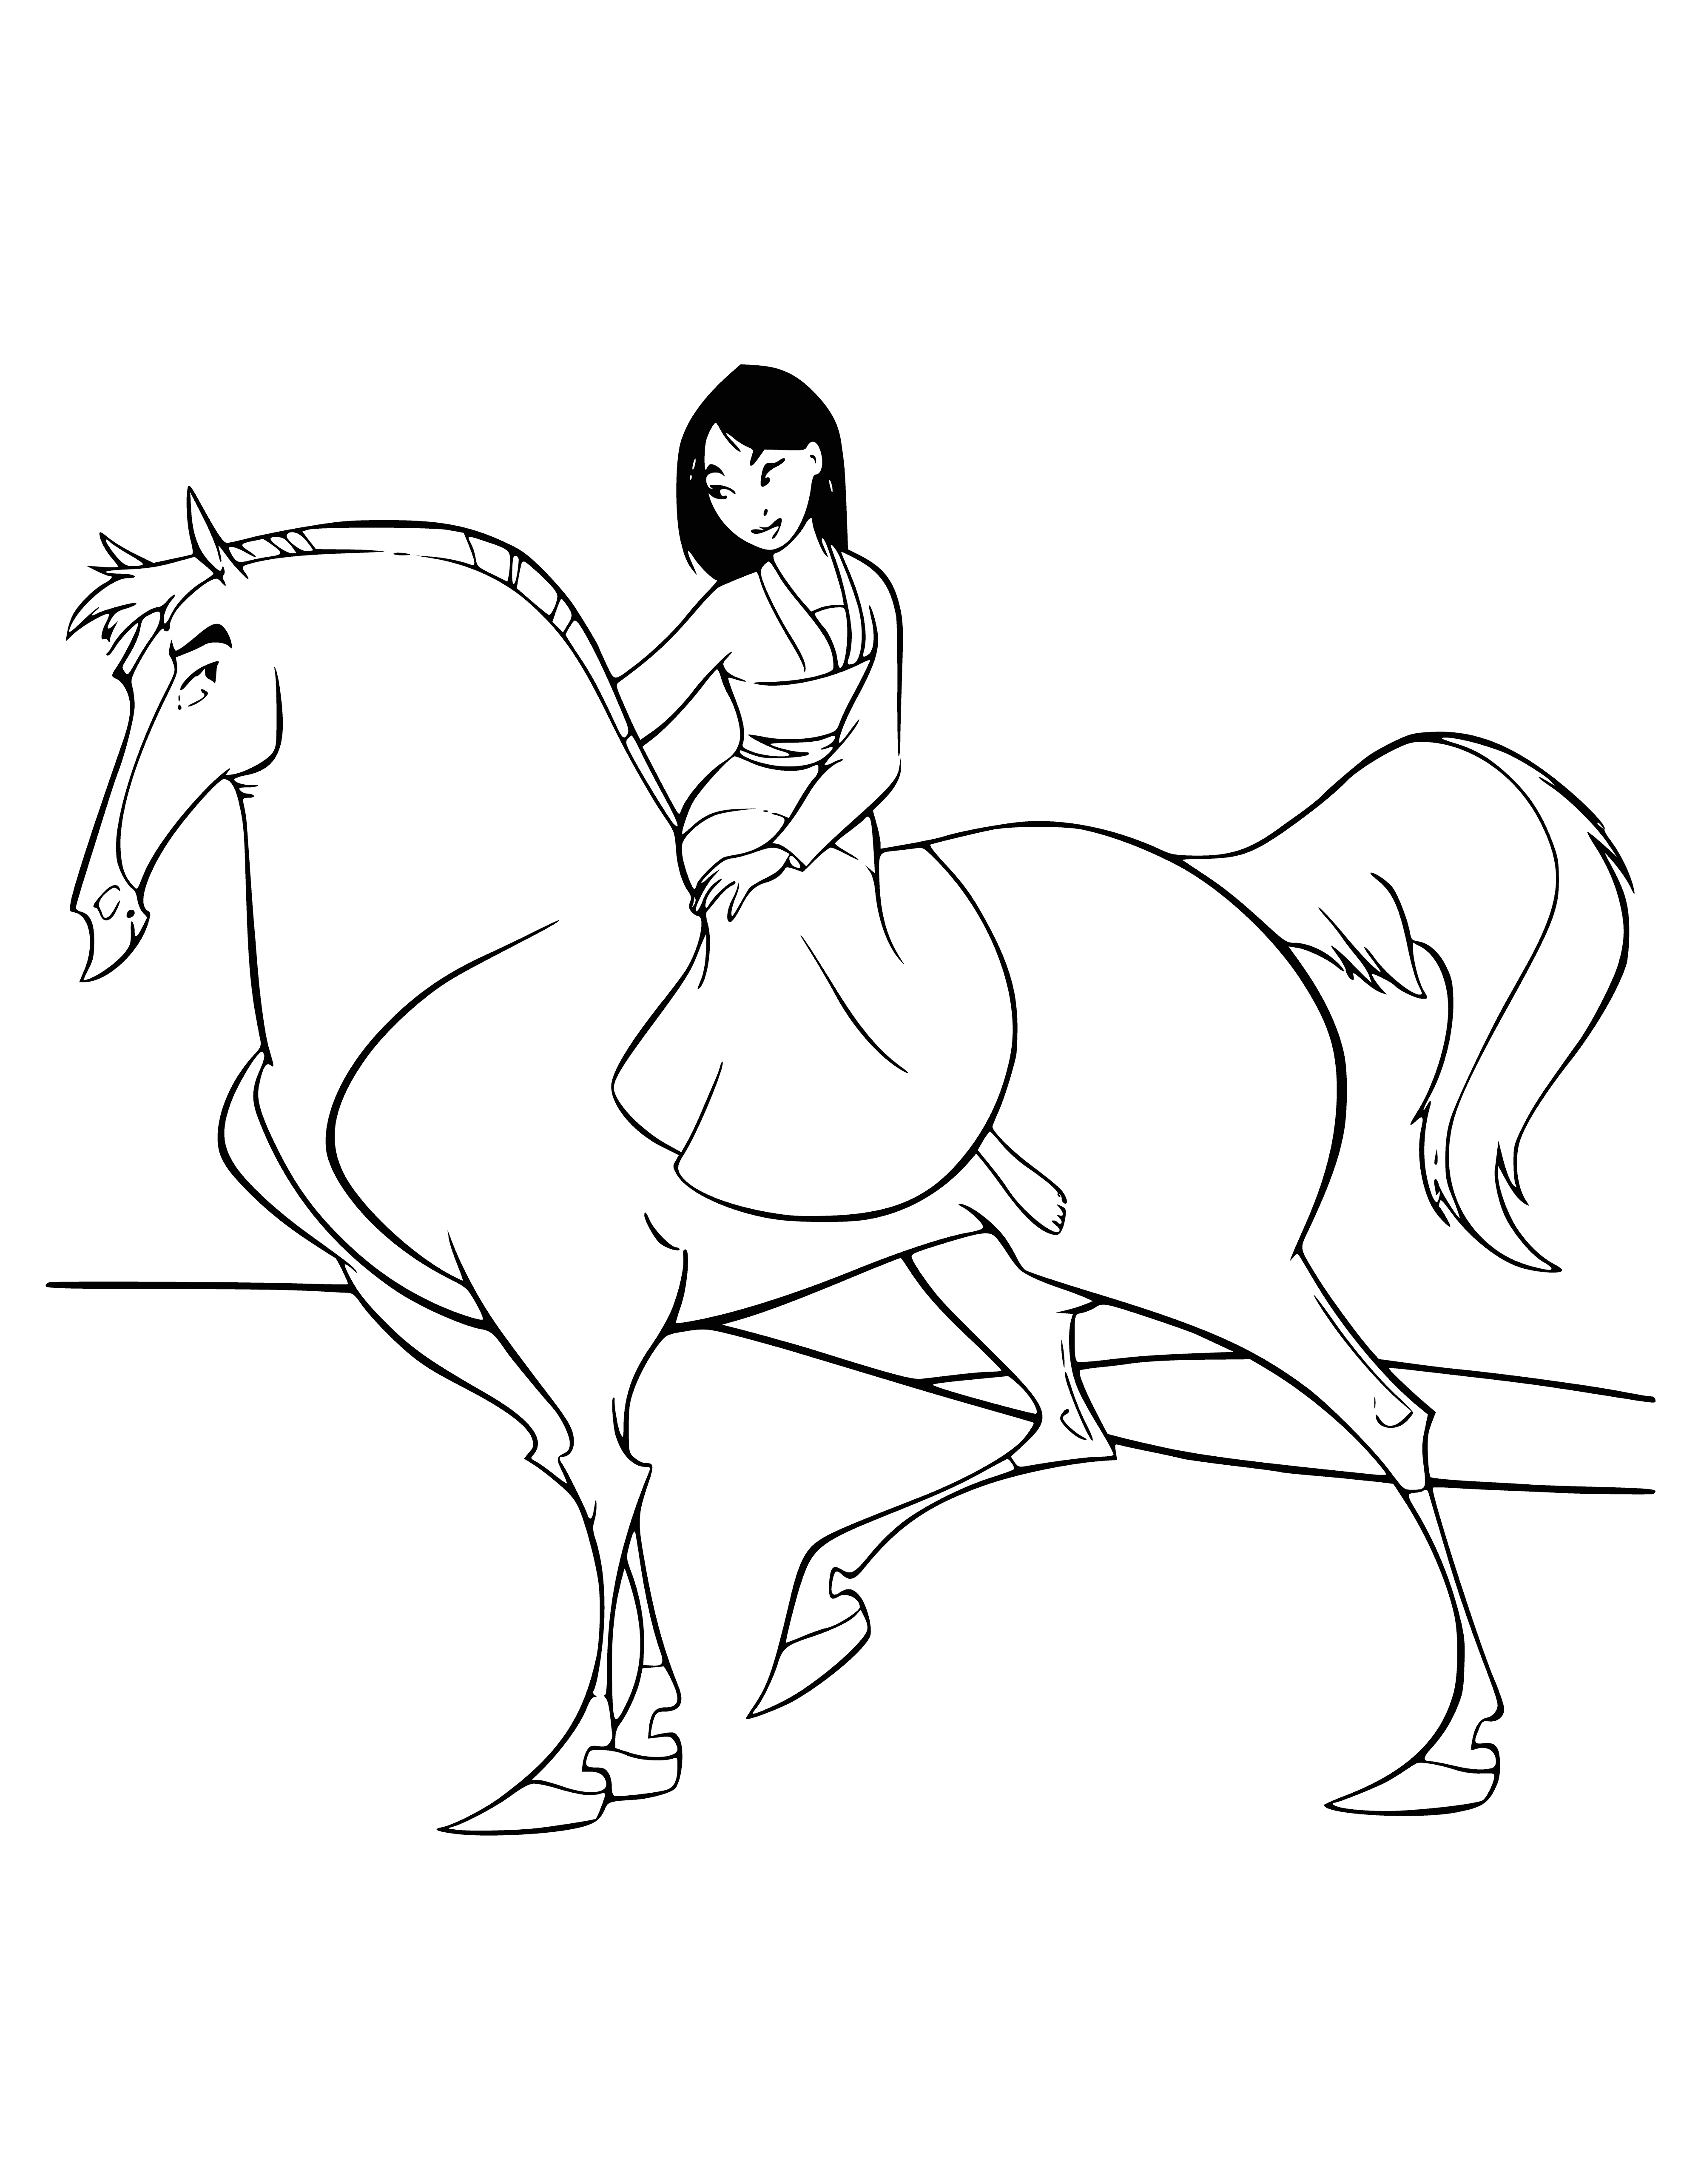 coloring page: Mulan is a brave hero who disguised herself to fight against the Huns and save China. #heroine #bravery #China